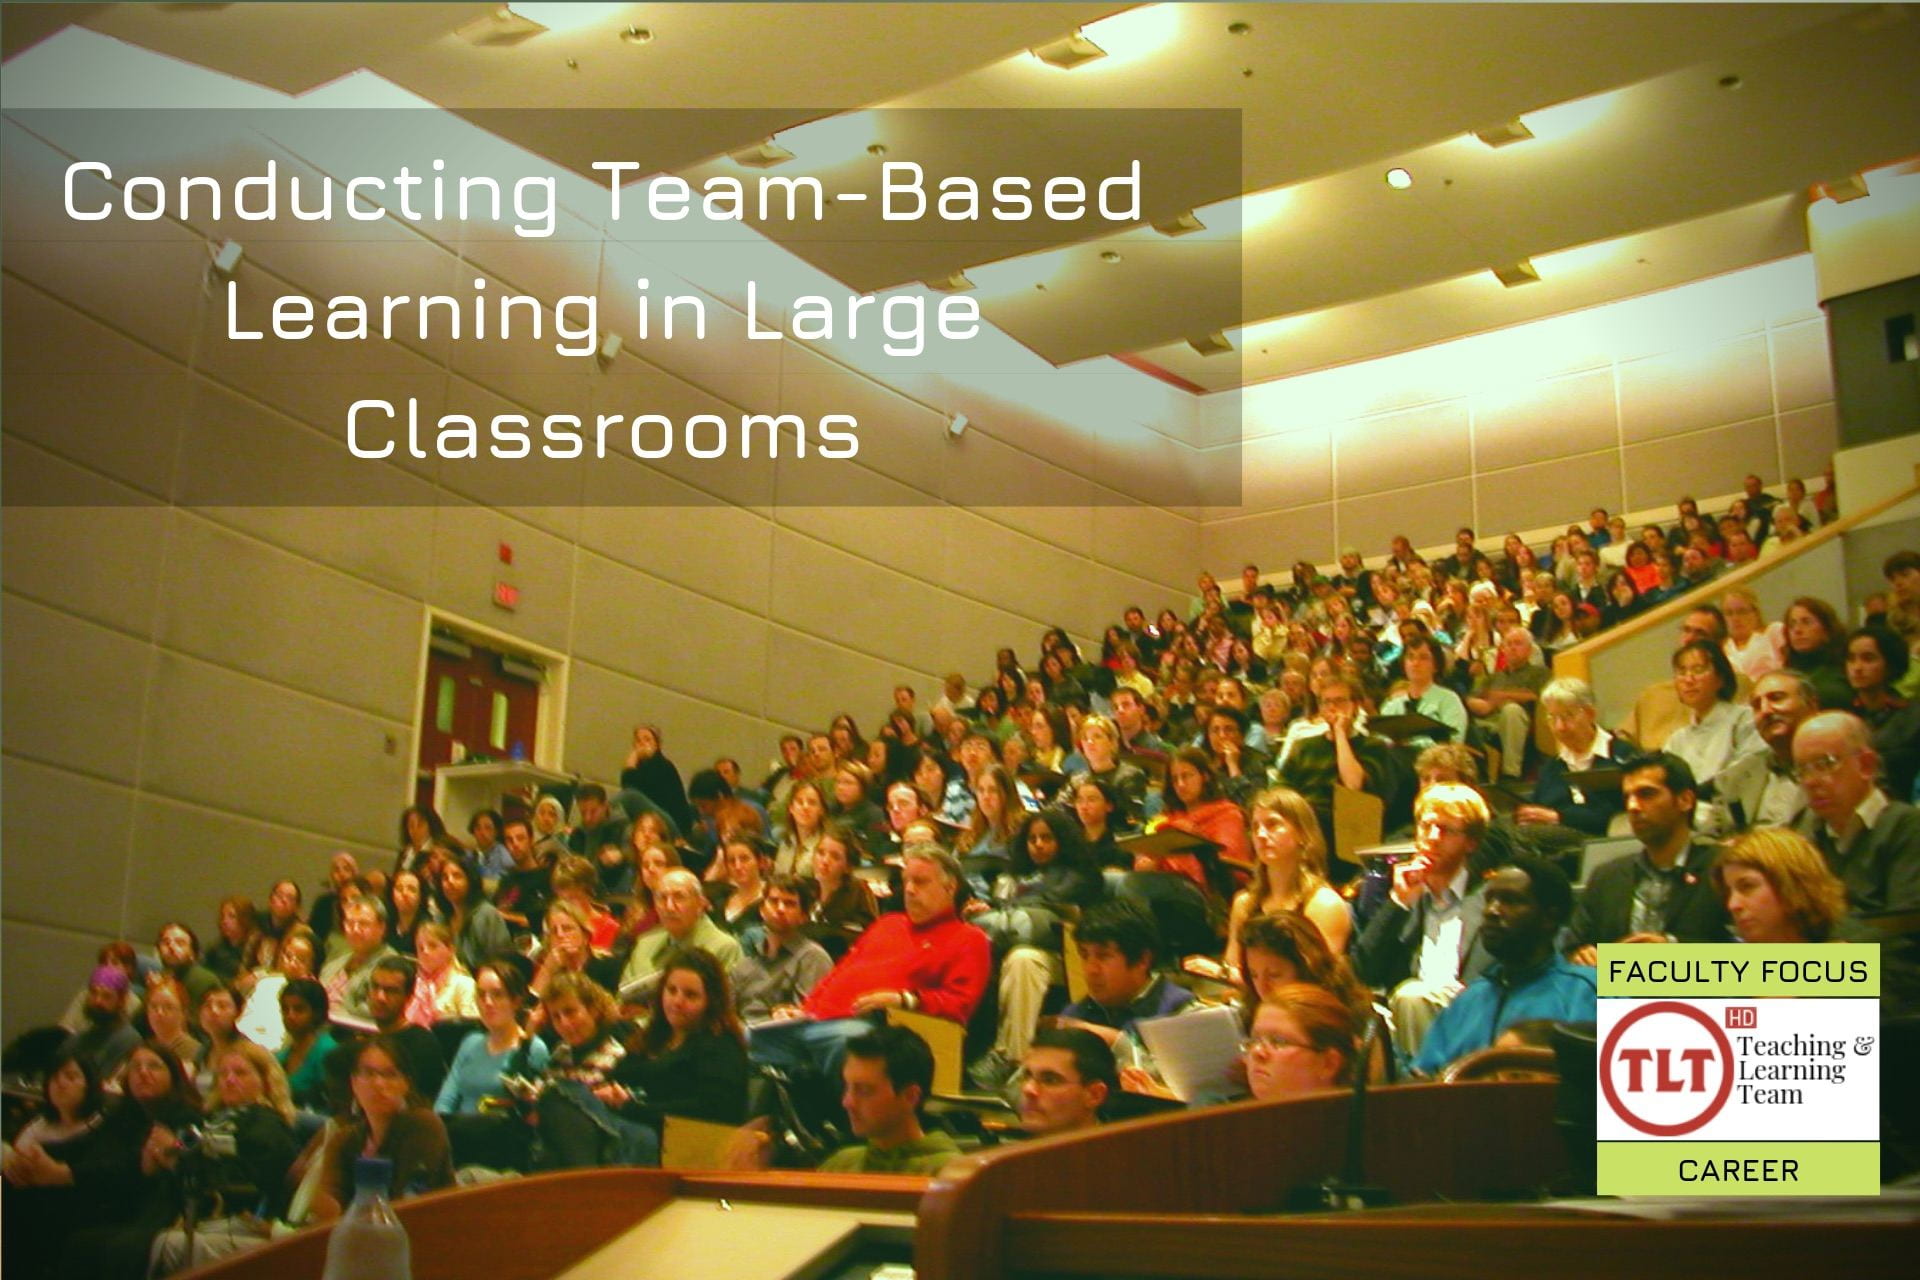 Teaching team-based learning in large classrooms. TLThd Faculty Focus